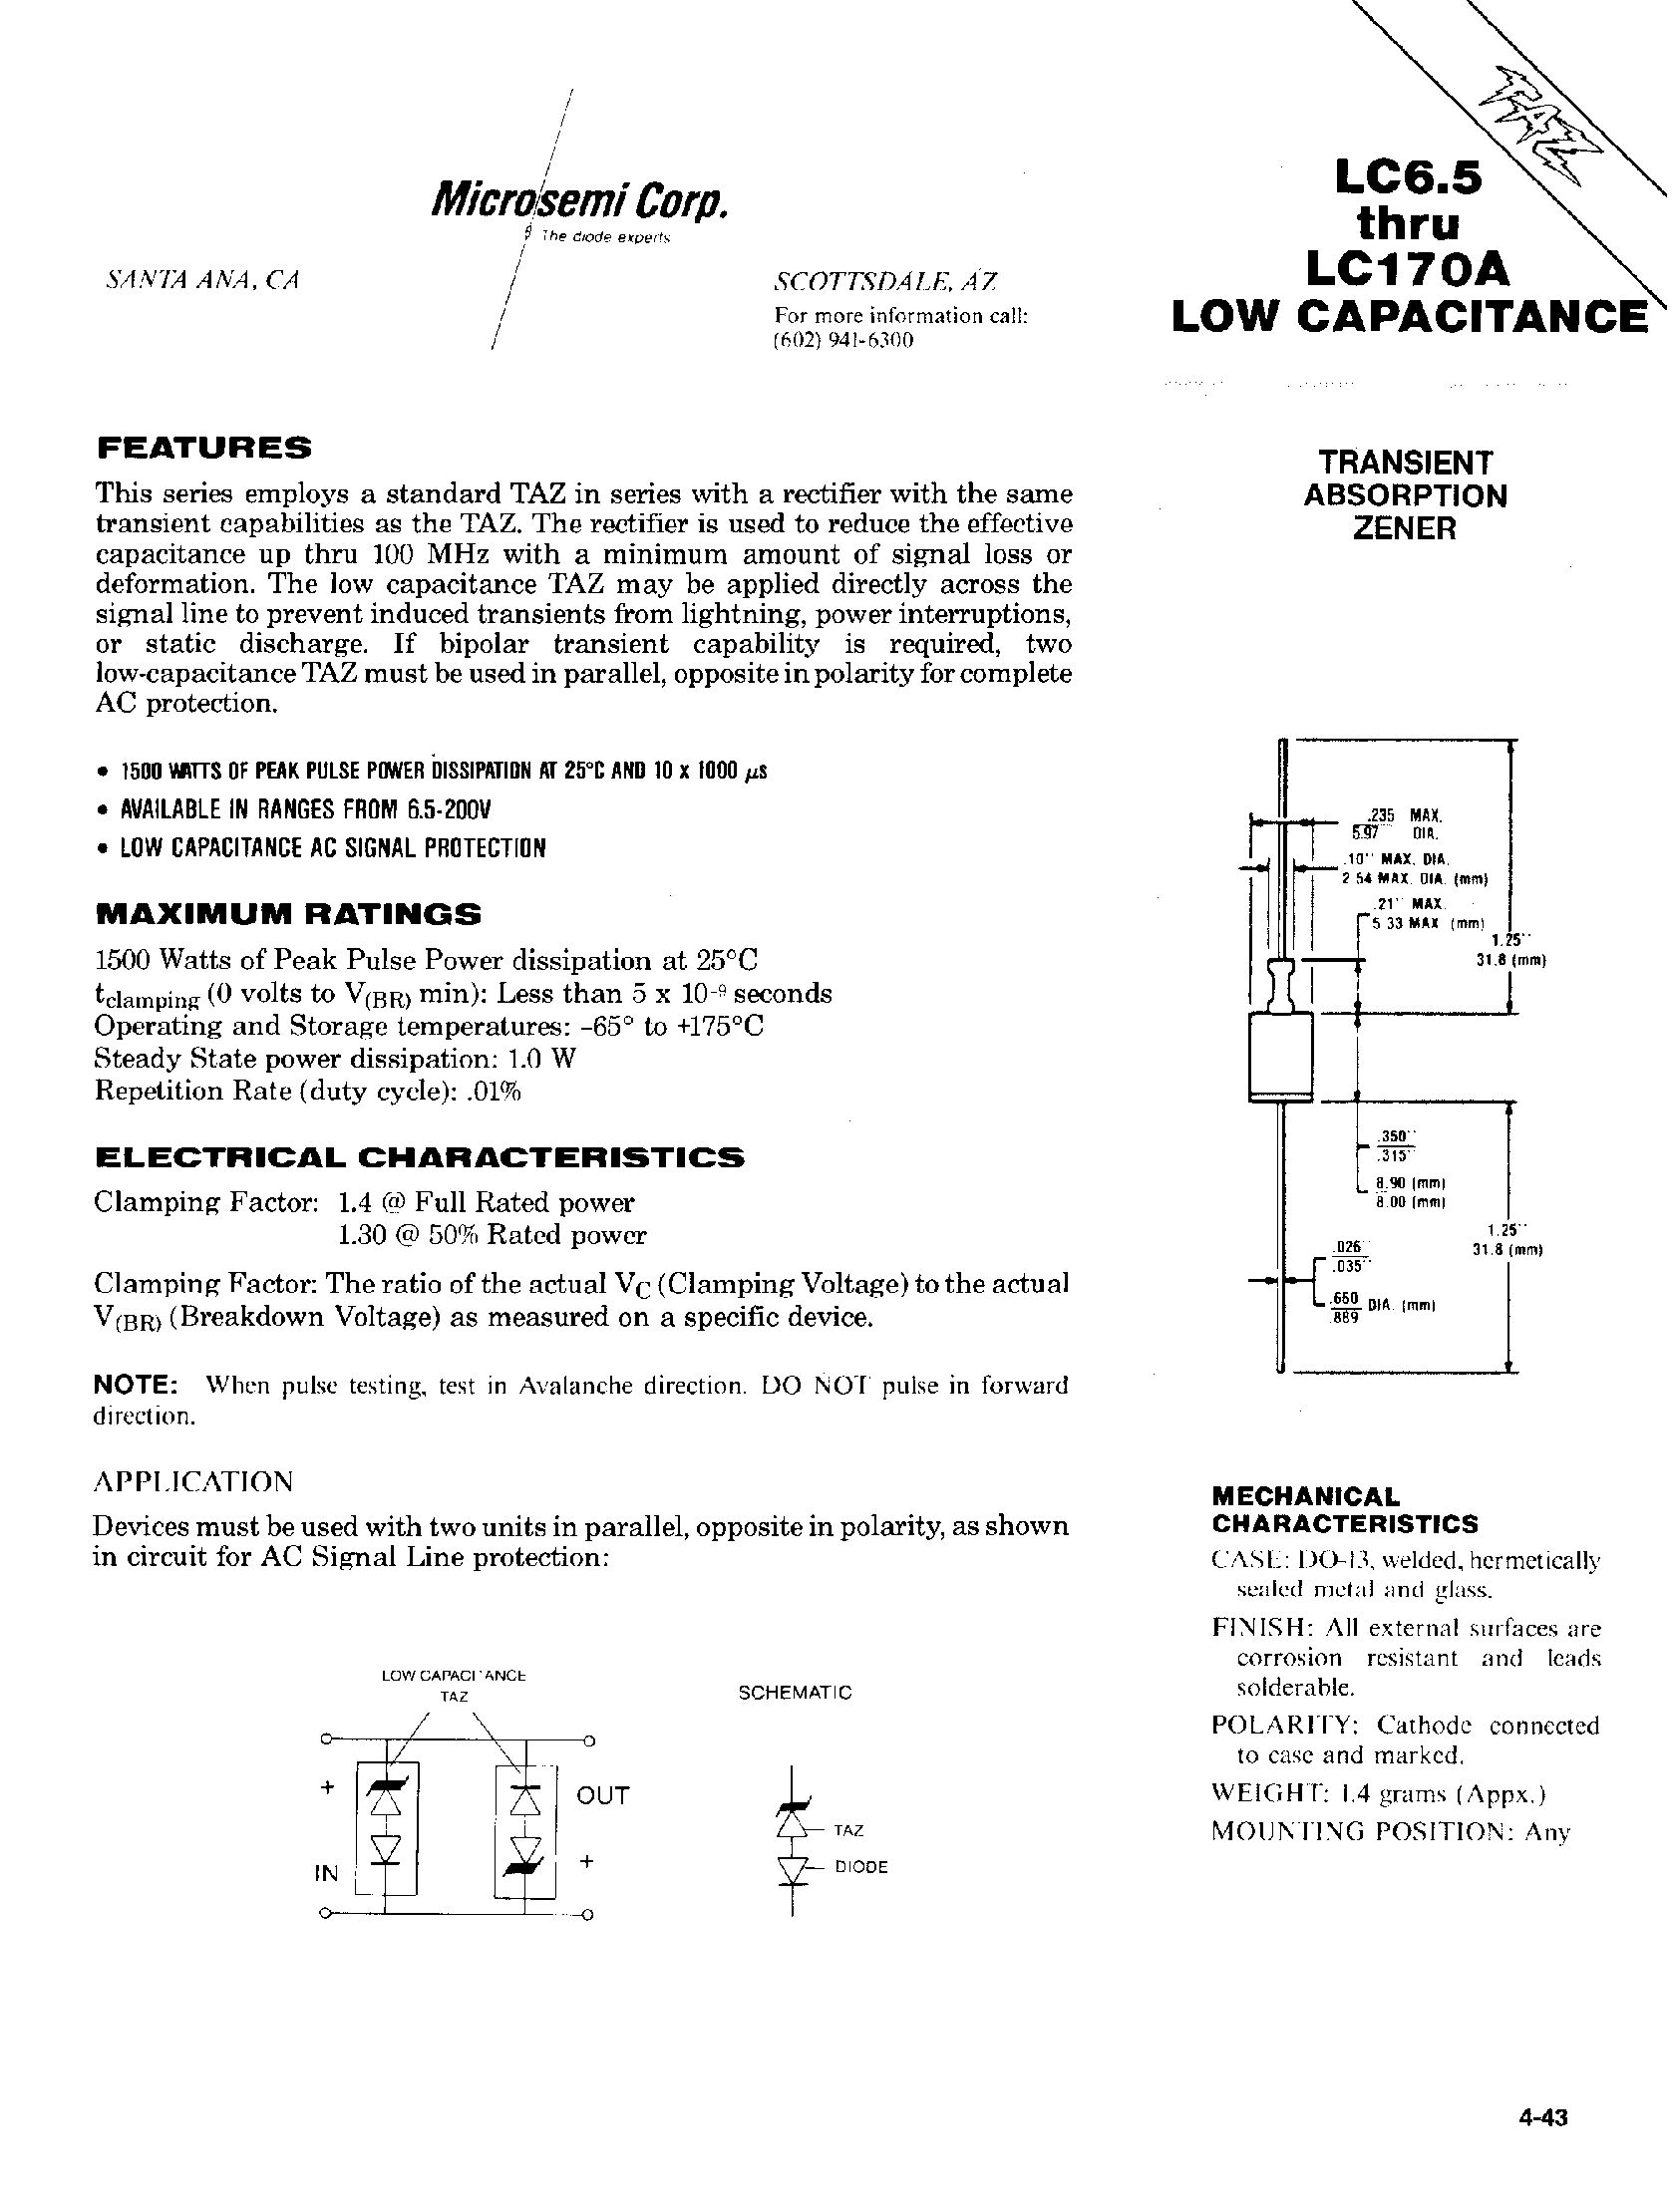 Даташит LC110A - TRANSIENT ABSORPTION ZENER страница 1